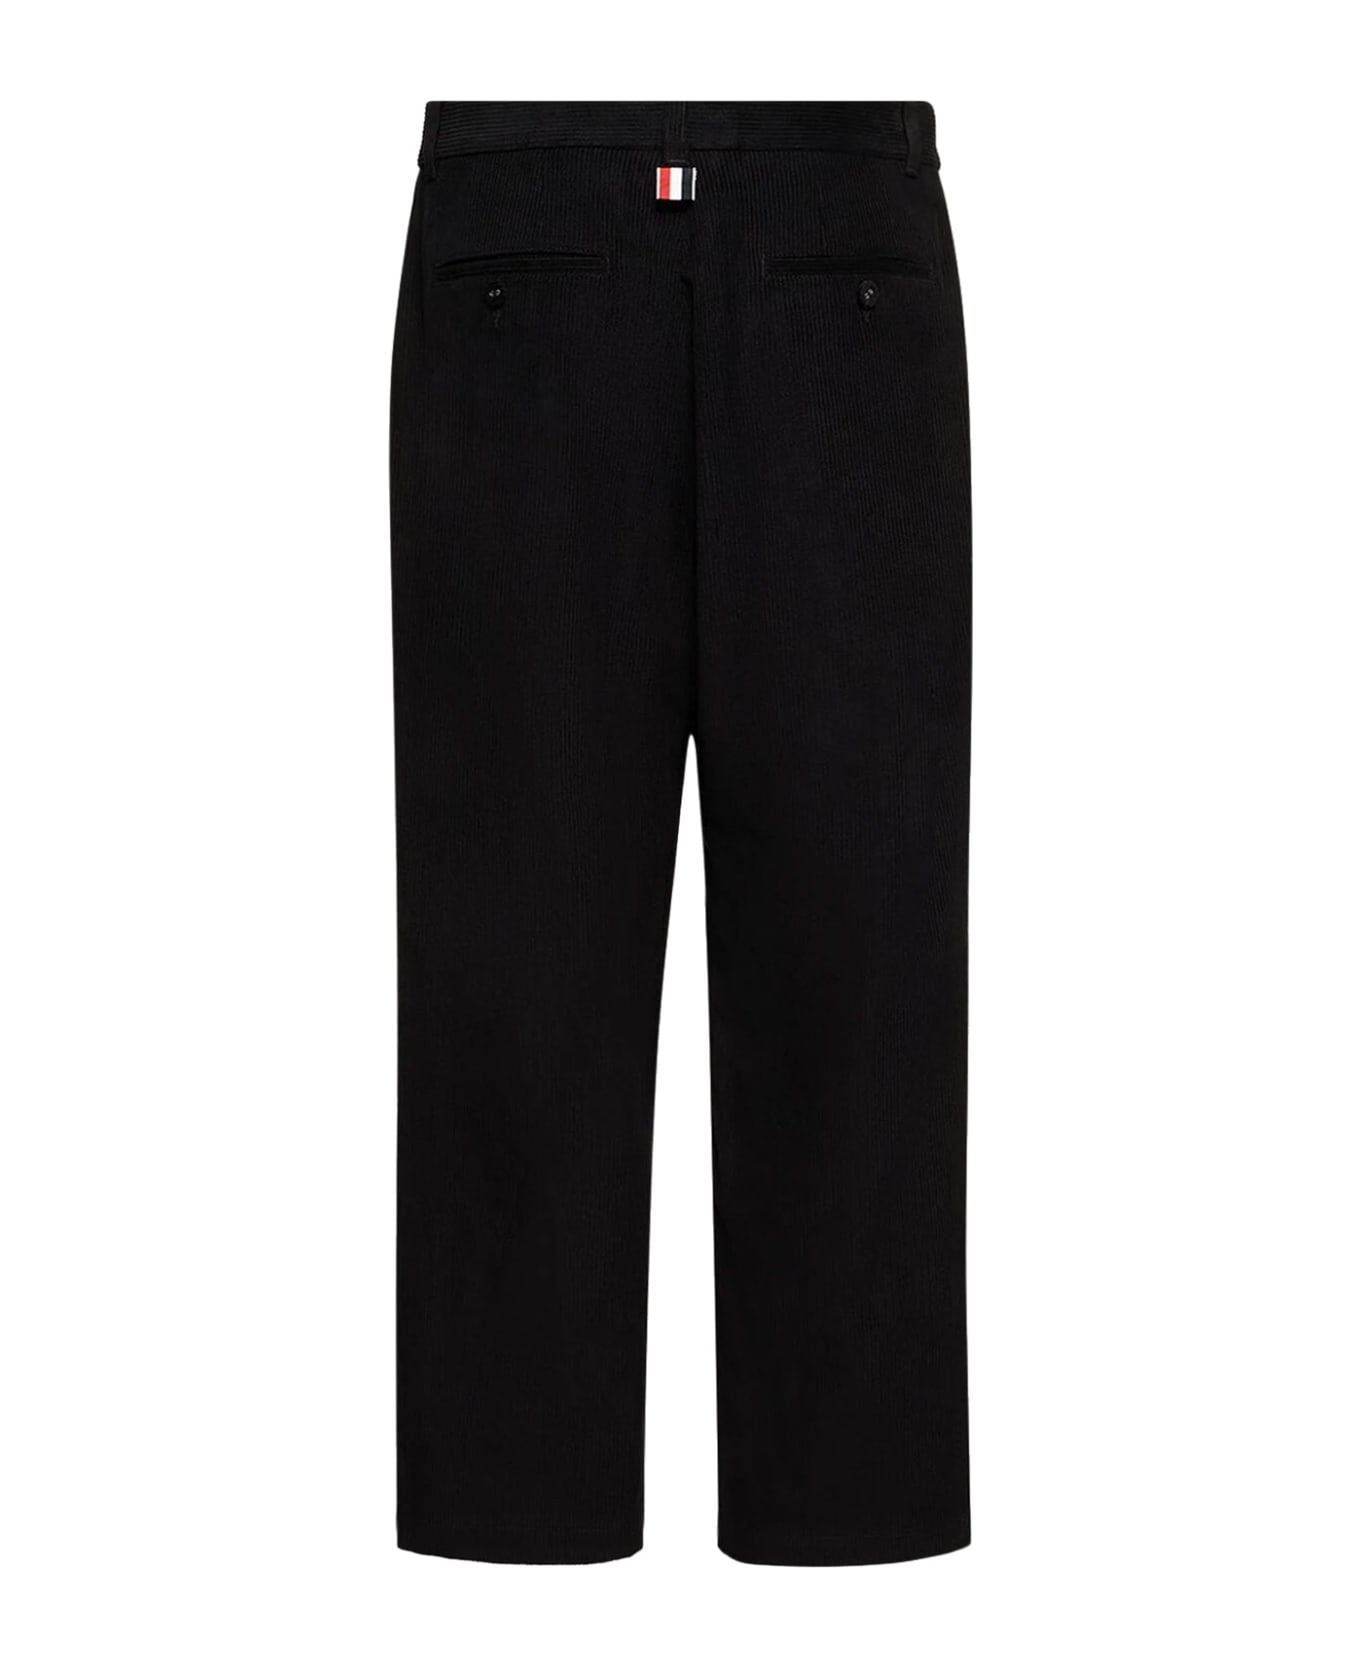 Thom Browne 'unconstructed In Corduroy' Cotton Pants - Black